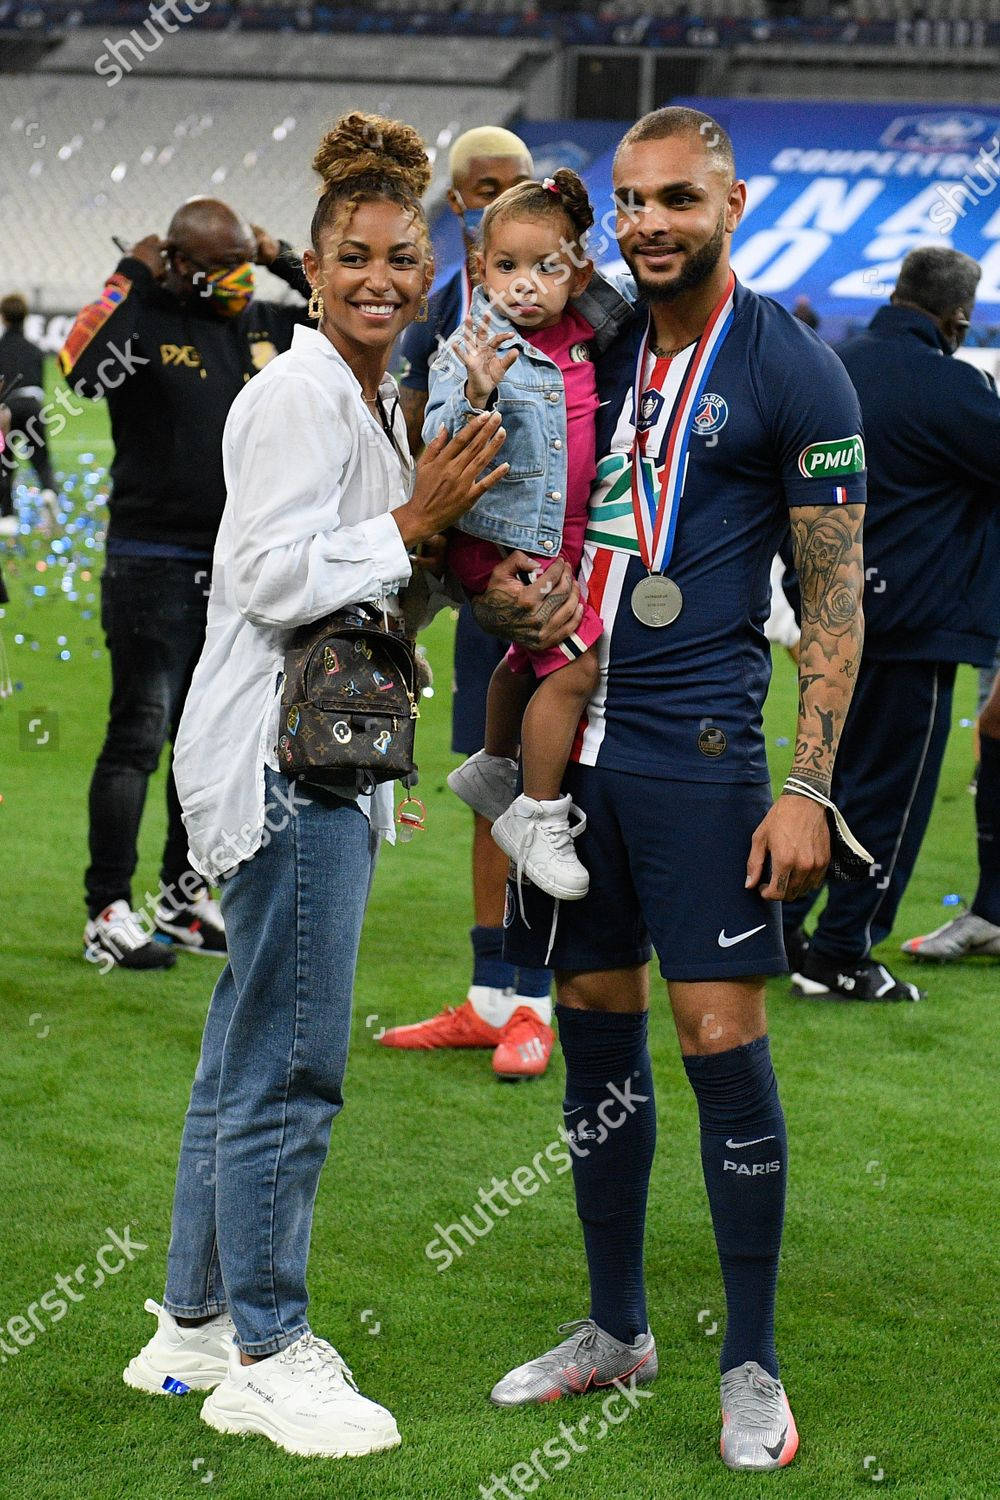 Layvinkurzawa Familj - (this Would Be The Translation If The Phrase 